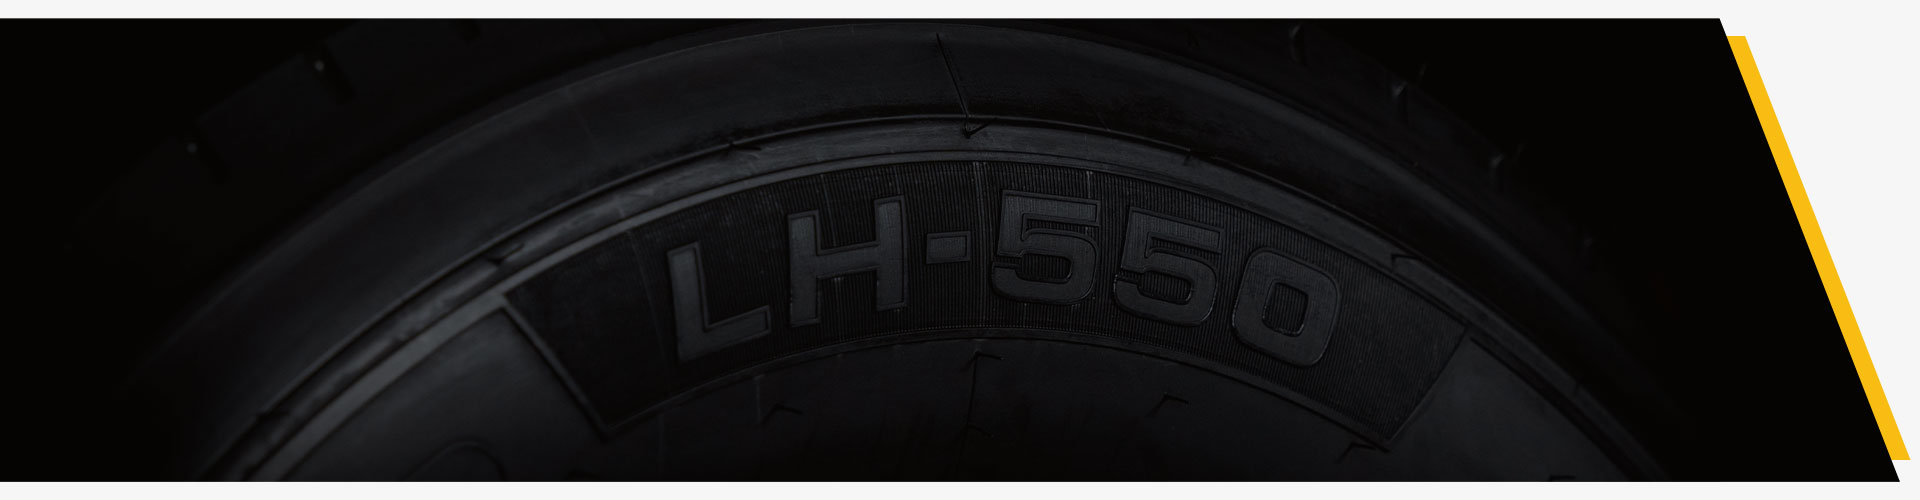 Commercial Truck Tires Image 3